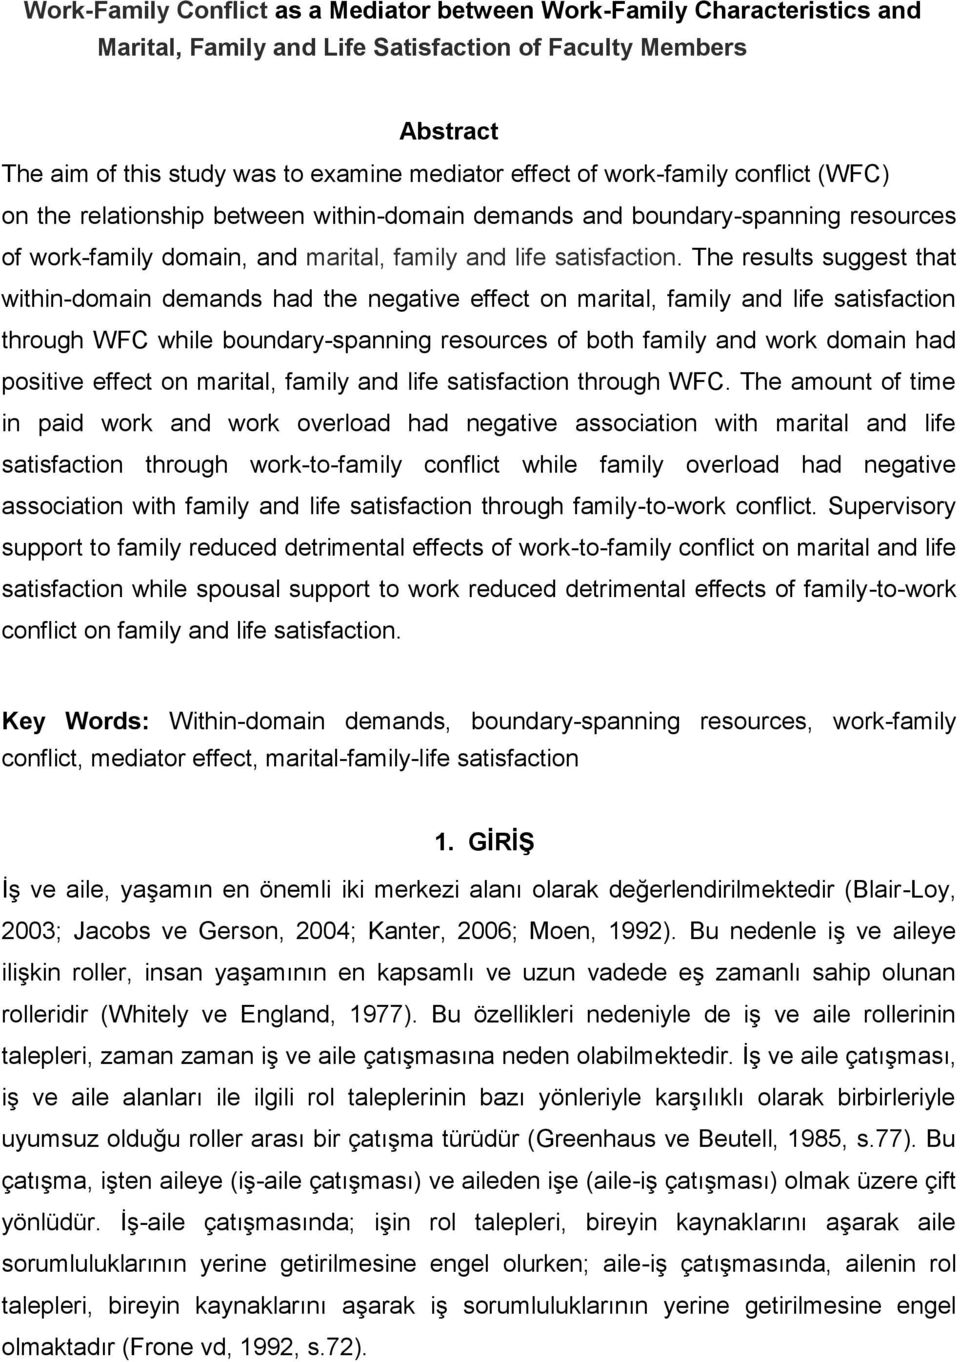 The results suggest that within-domain demands had the negative effect on marital, family and life satisfaction through WFC while boundary-spanning resources of both family and work domain had